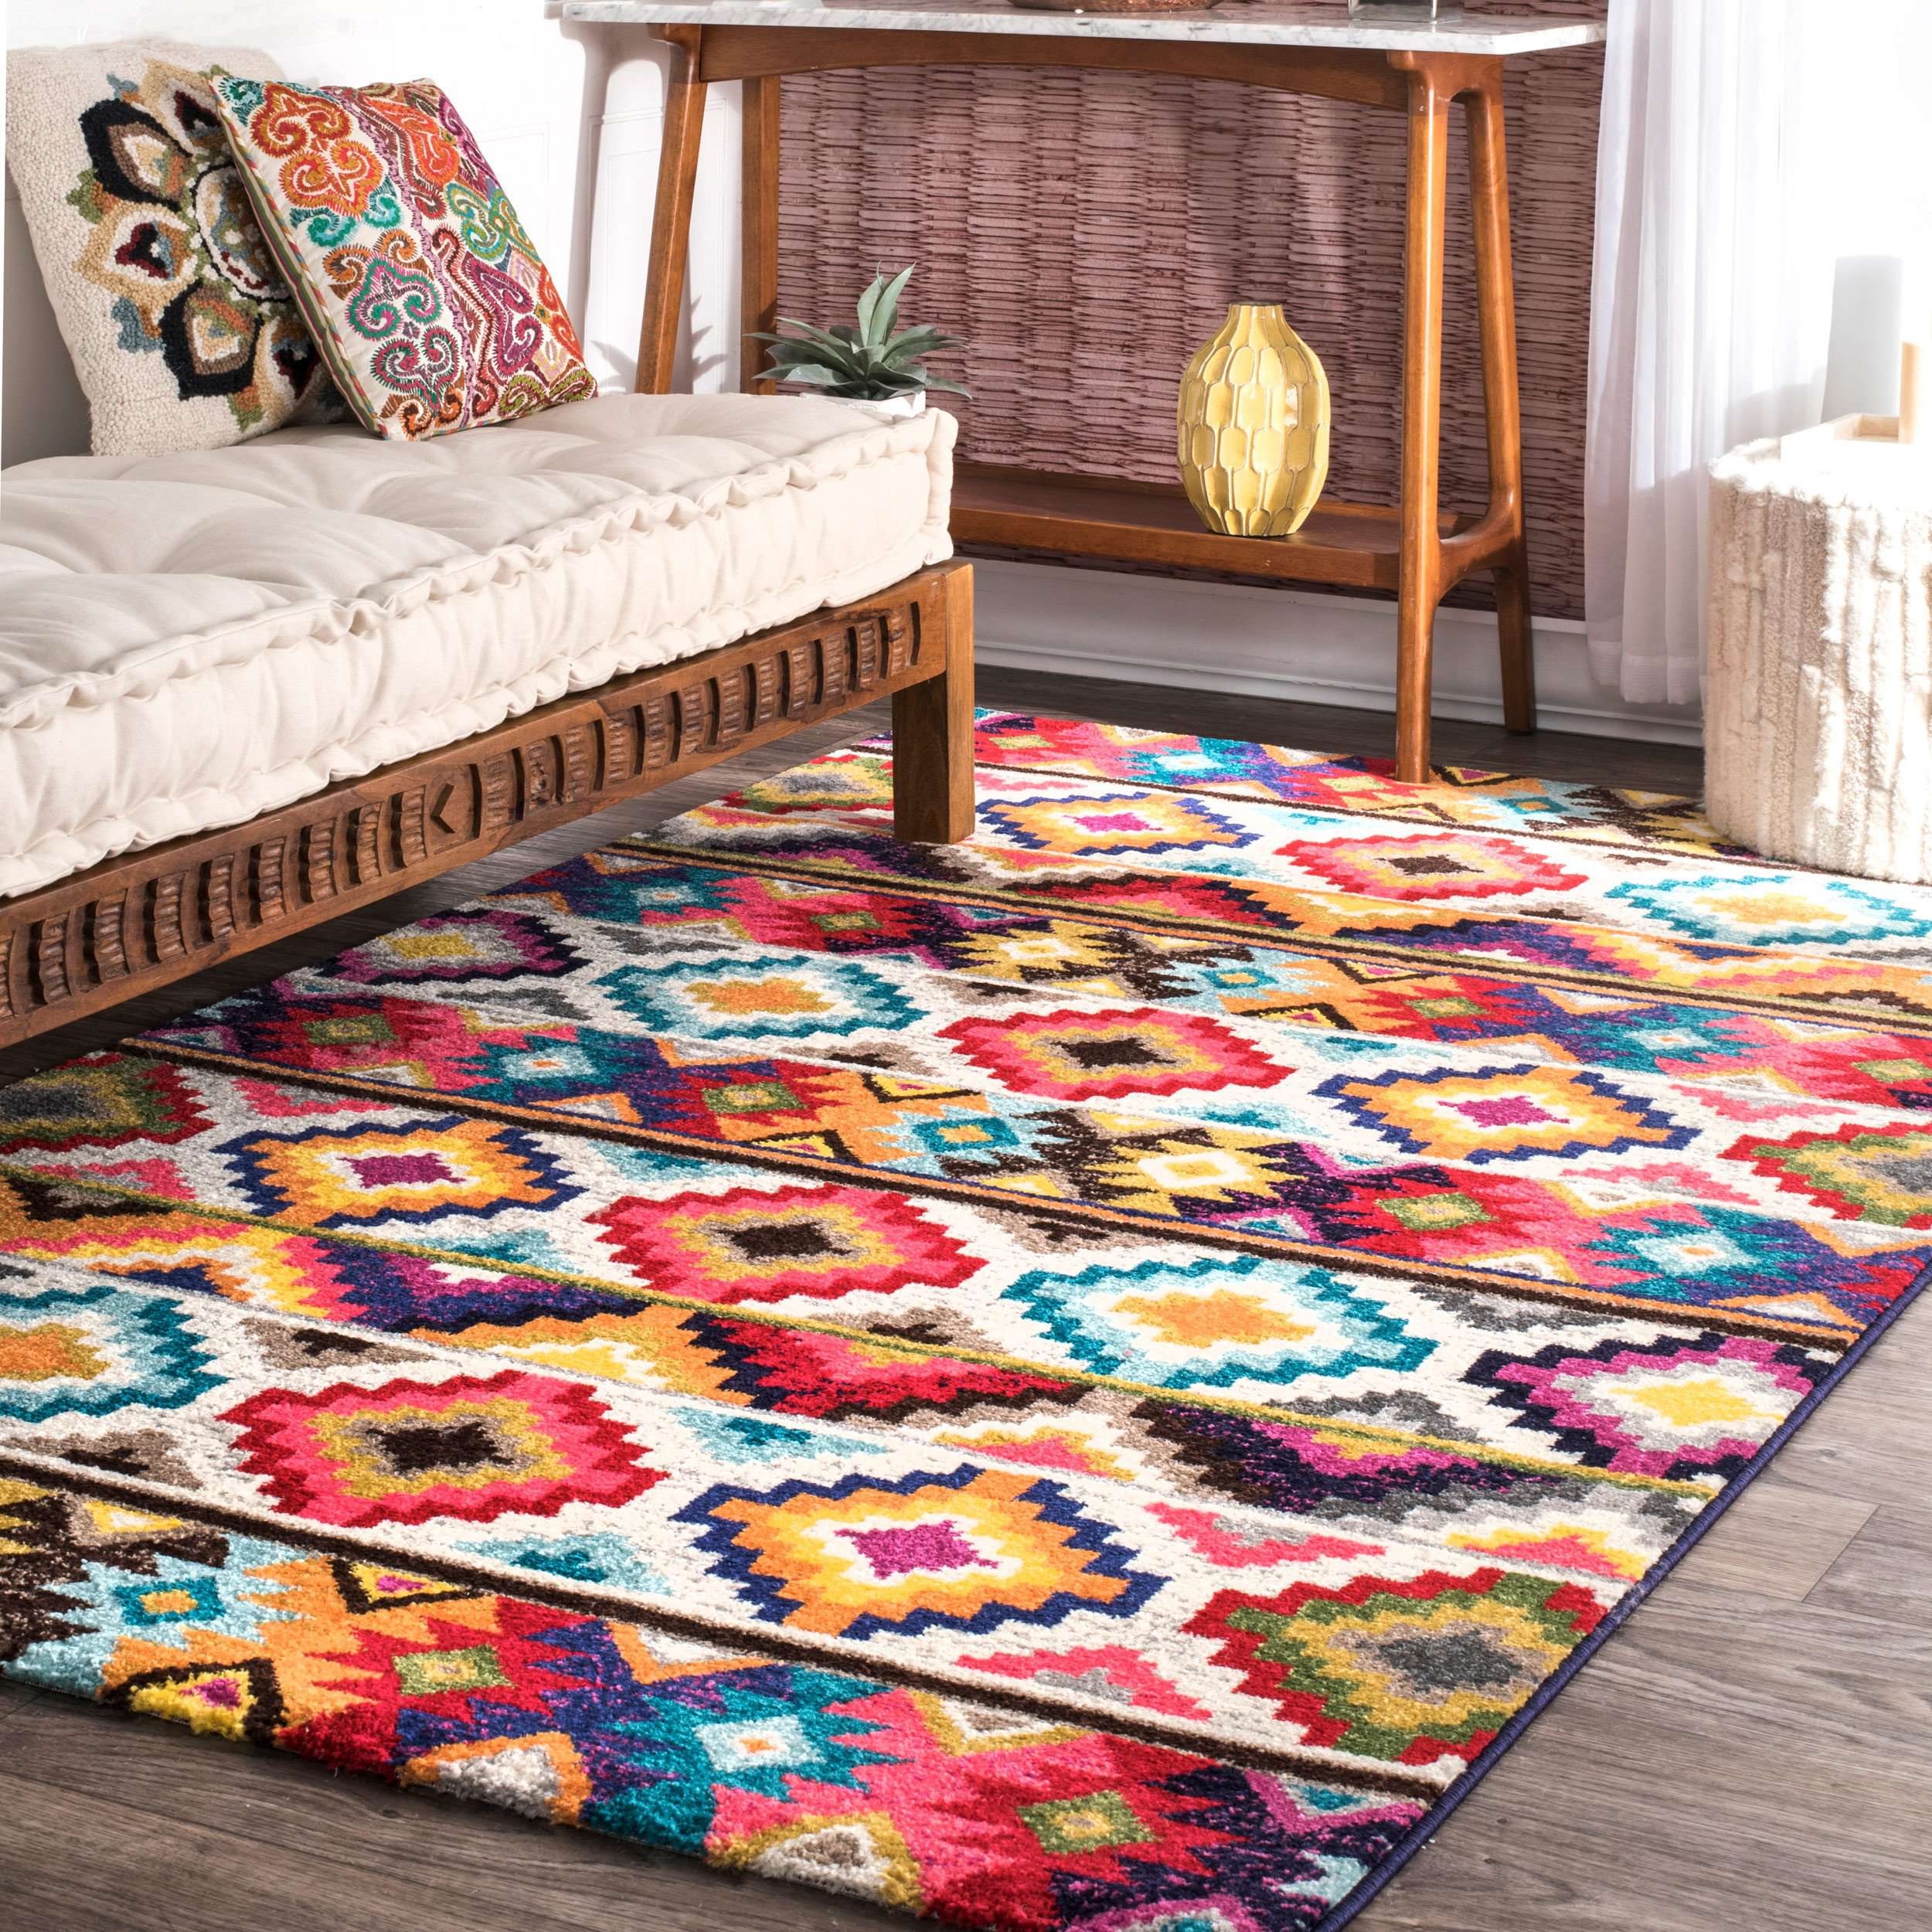 Colorful Rugs For Living Room Visualhunt, Colorful Living Room Rugs